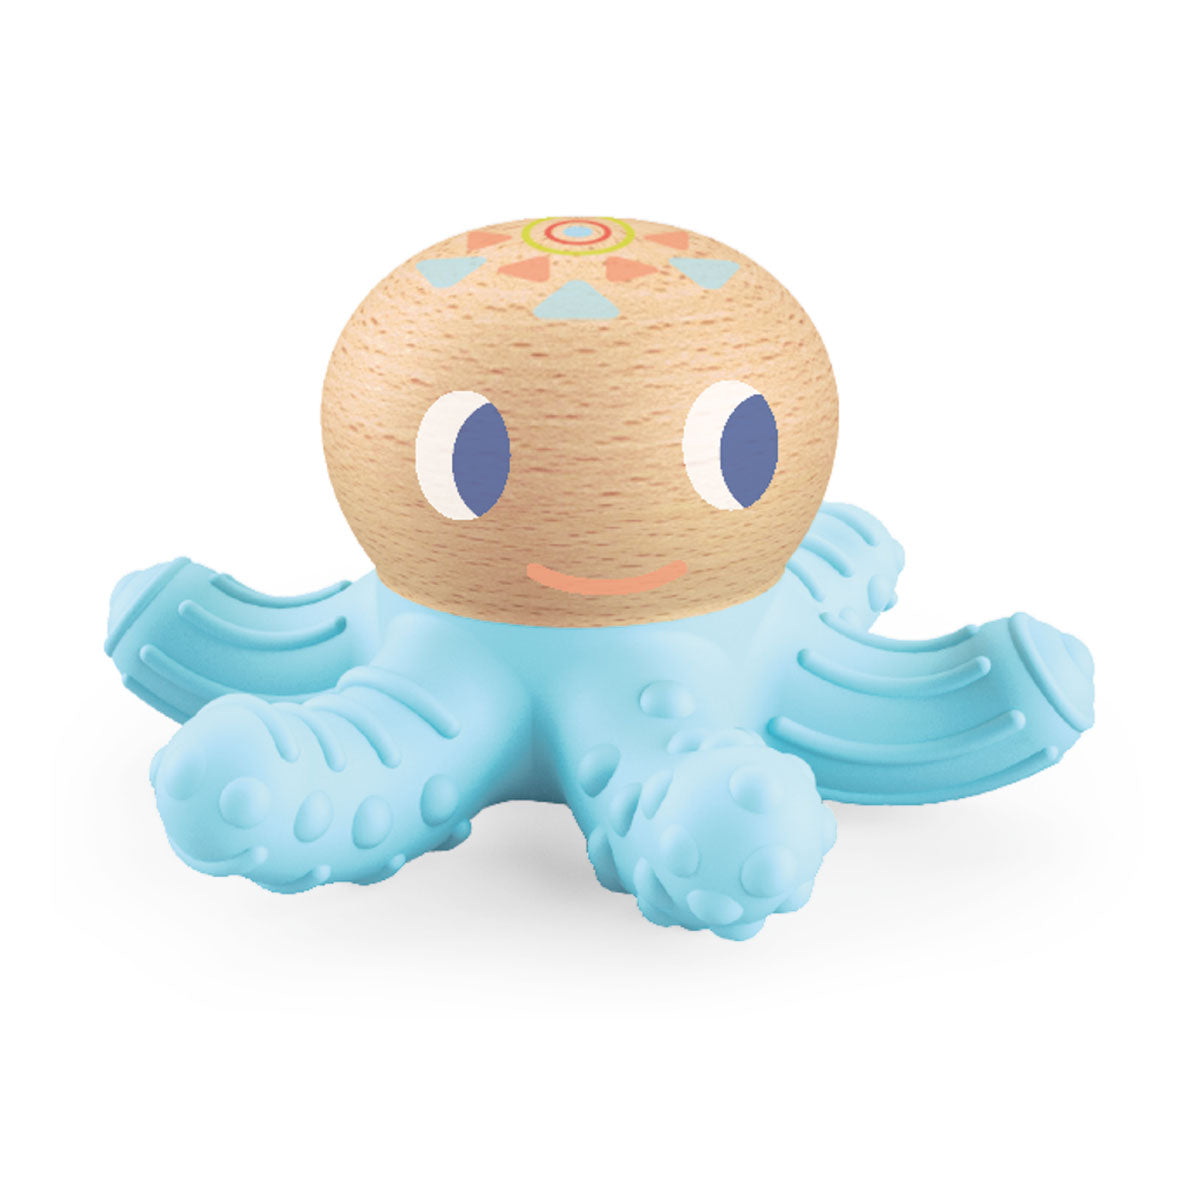 Baby Squid Infant Teether from Djeco